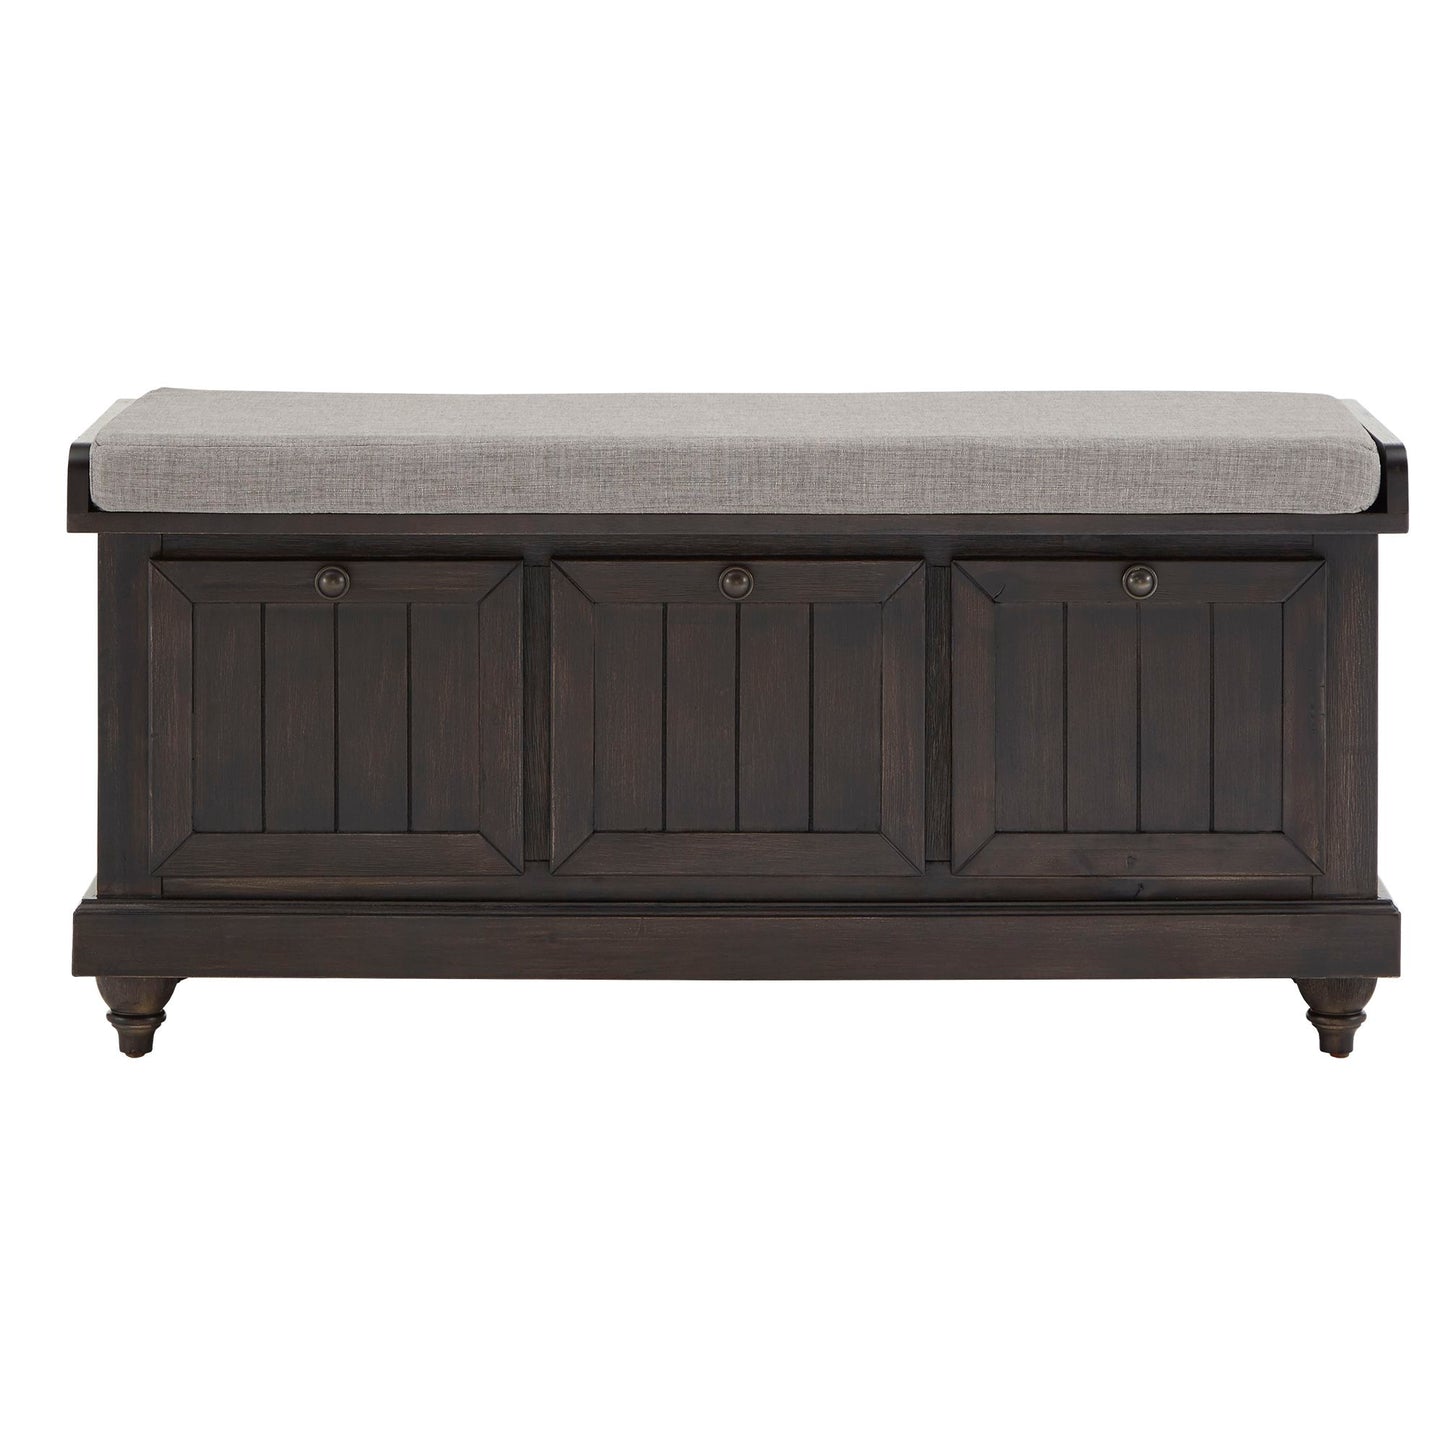 Storage Bench with Linen Seat Cushion - Antique Black Finish